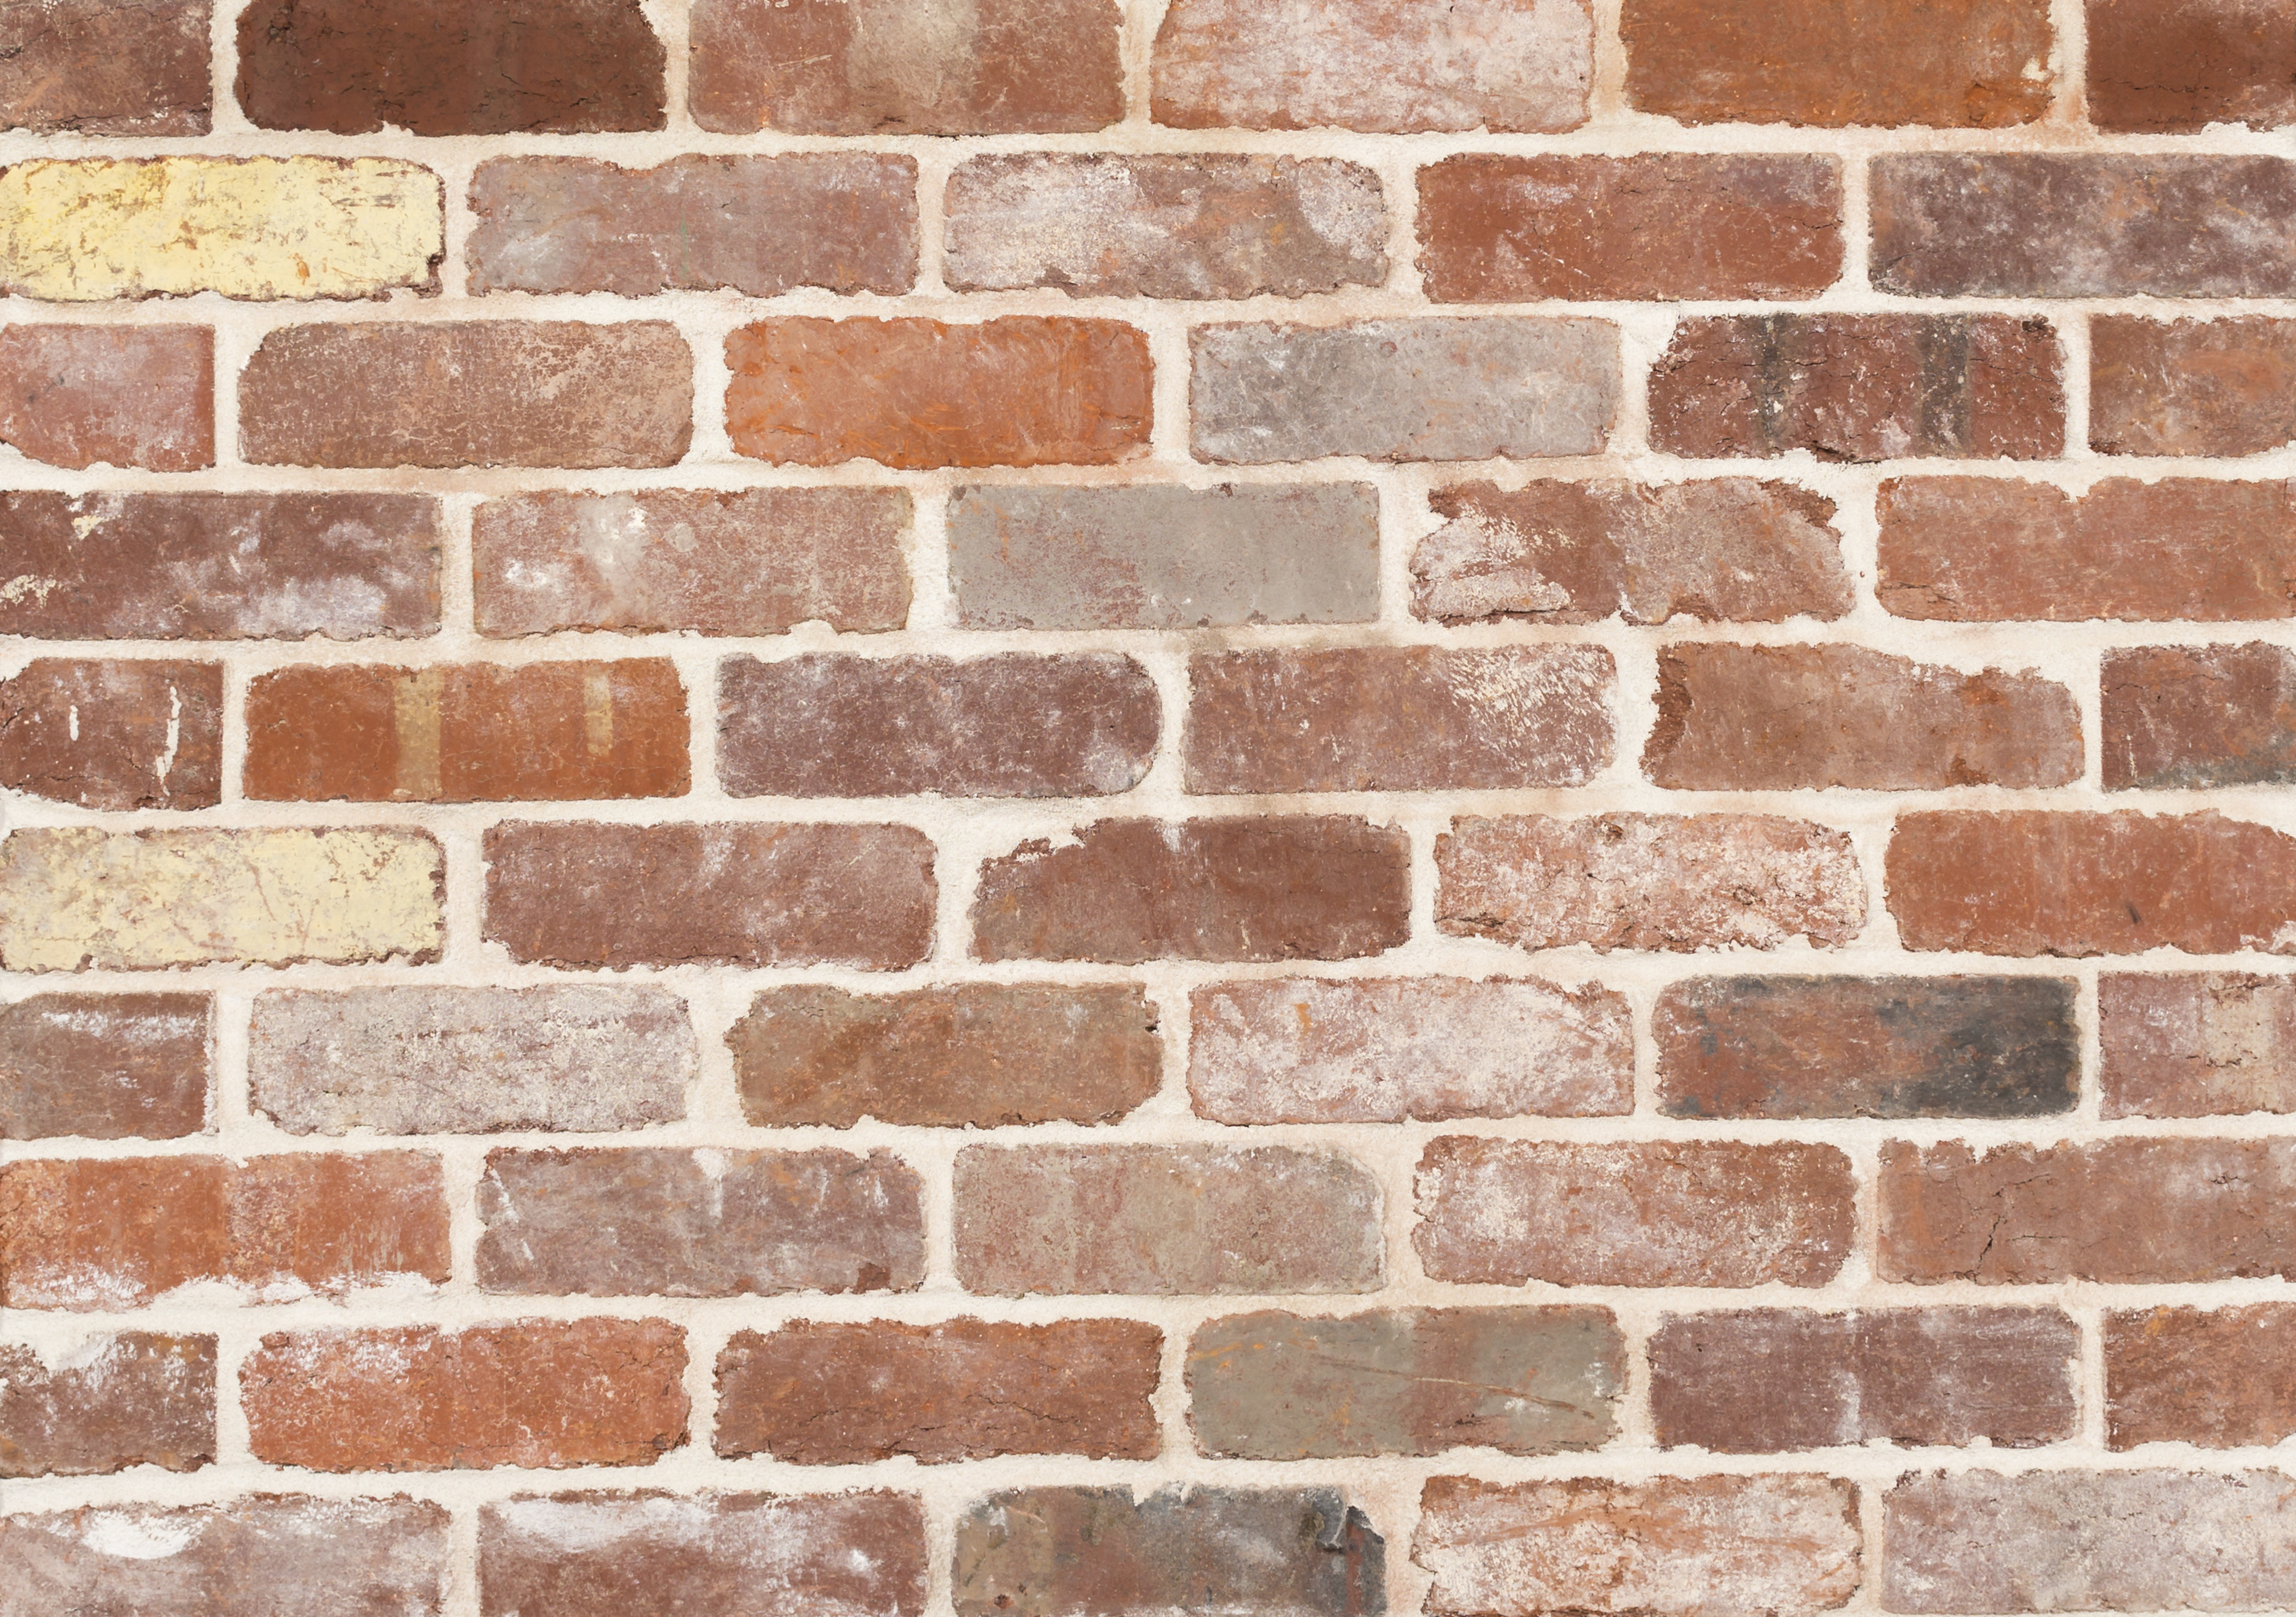 Brikmakers - Recycled Face Brick, Recycled Bricks, Recycled Brick ...